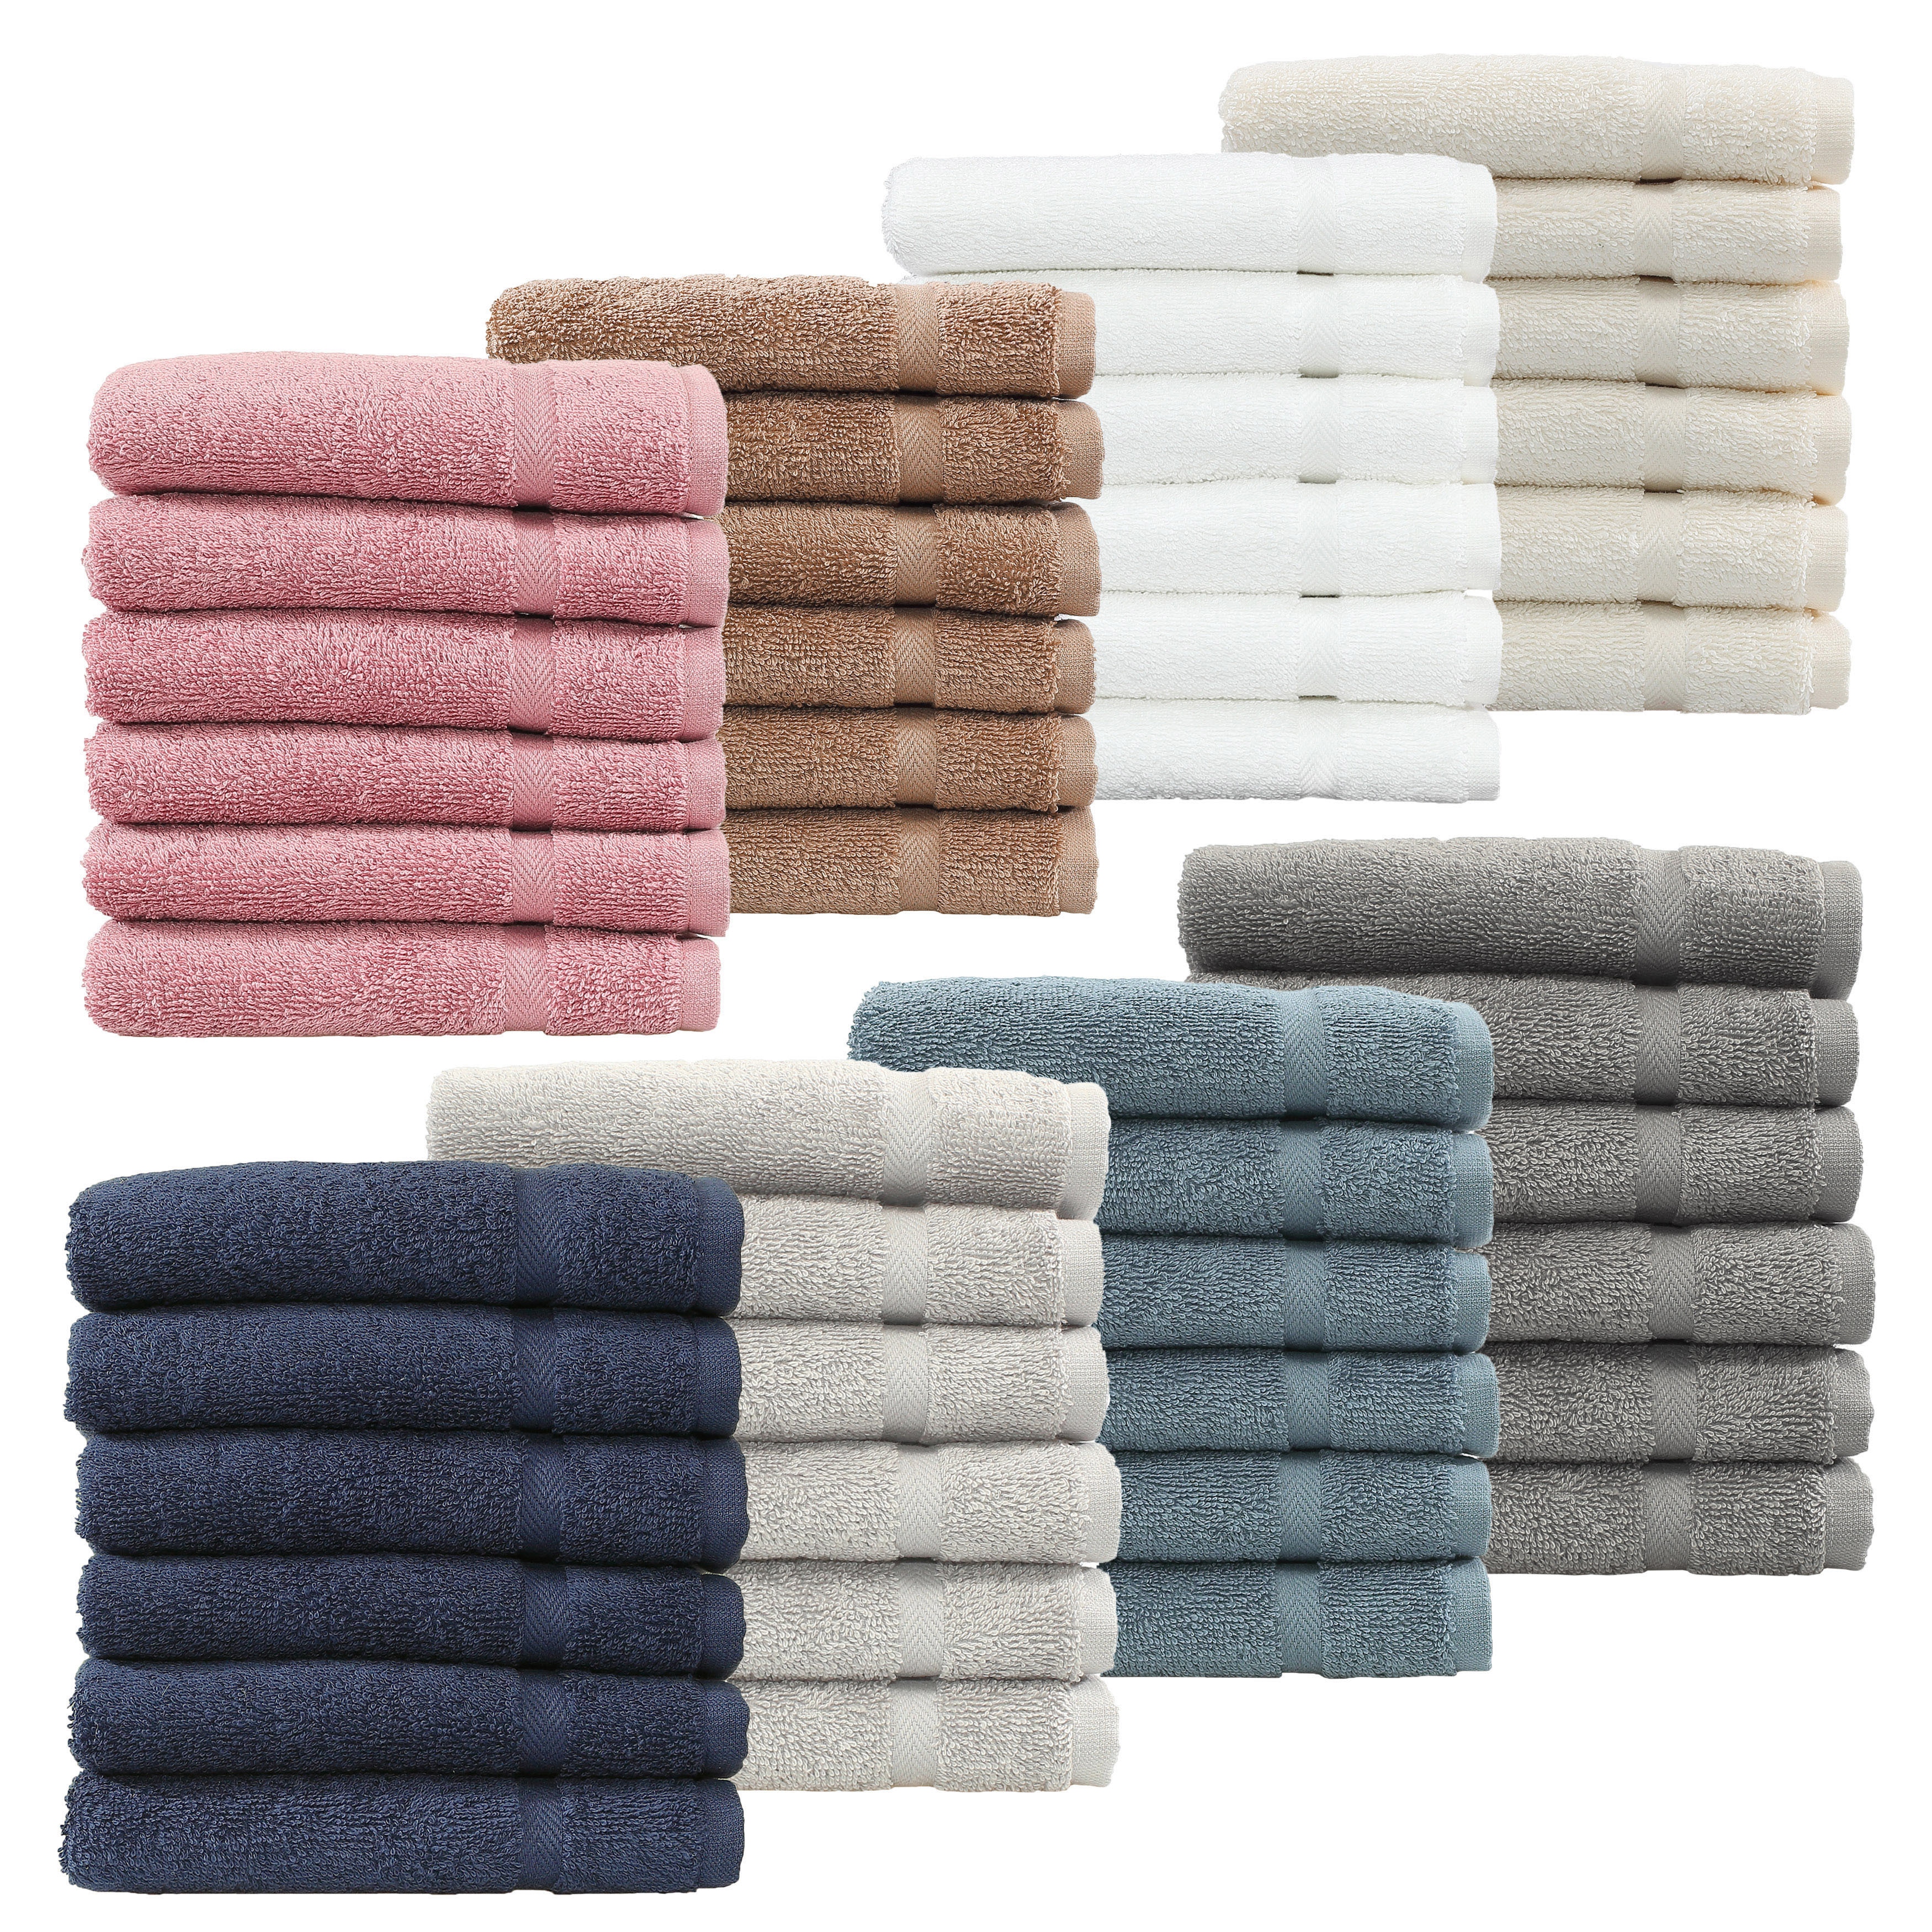 https://ak1.ostkcdn.com/images/products/11090783/Authentic-Hotel-and-Spa-Omni-Turkish-Cotton-Terry-Washcloths-Set-of-6-f2e173ad-404a-4793-a9f9-2a43a8c120a4.jpg